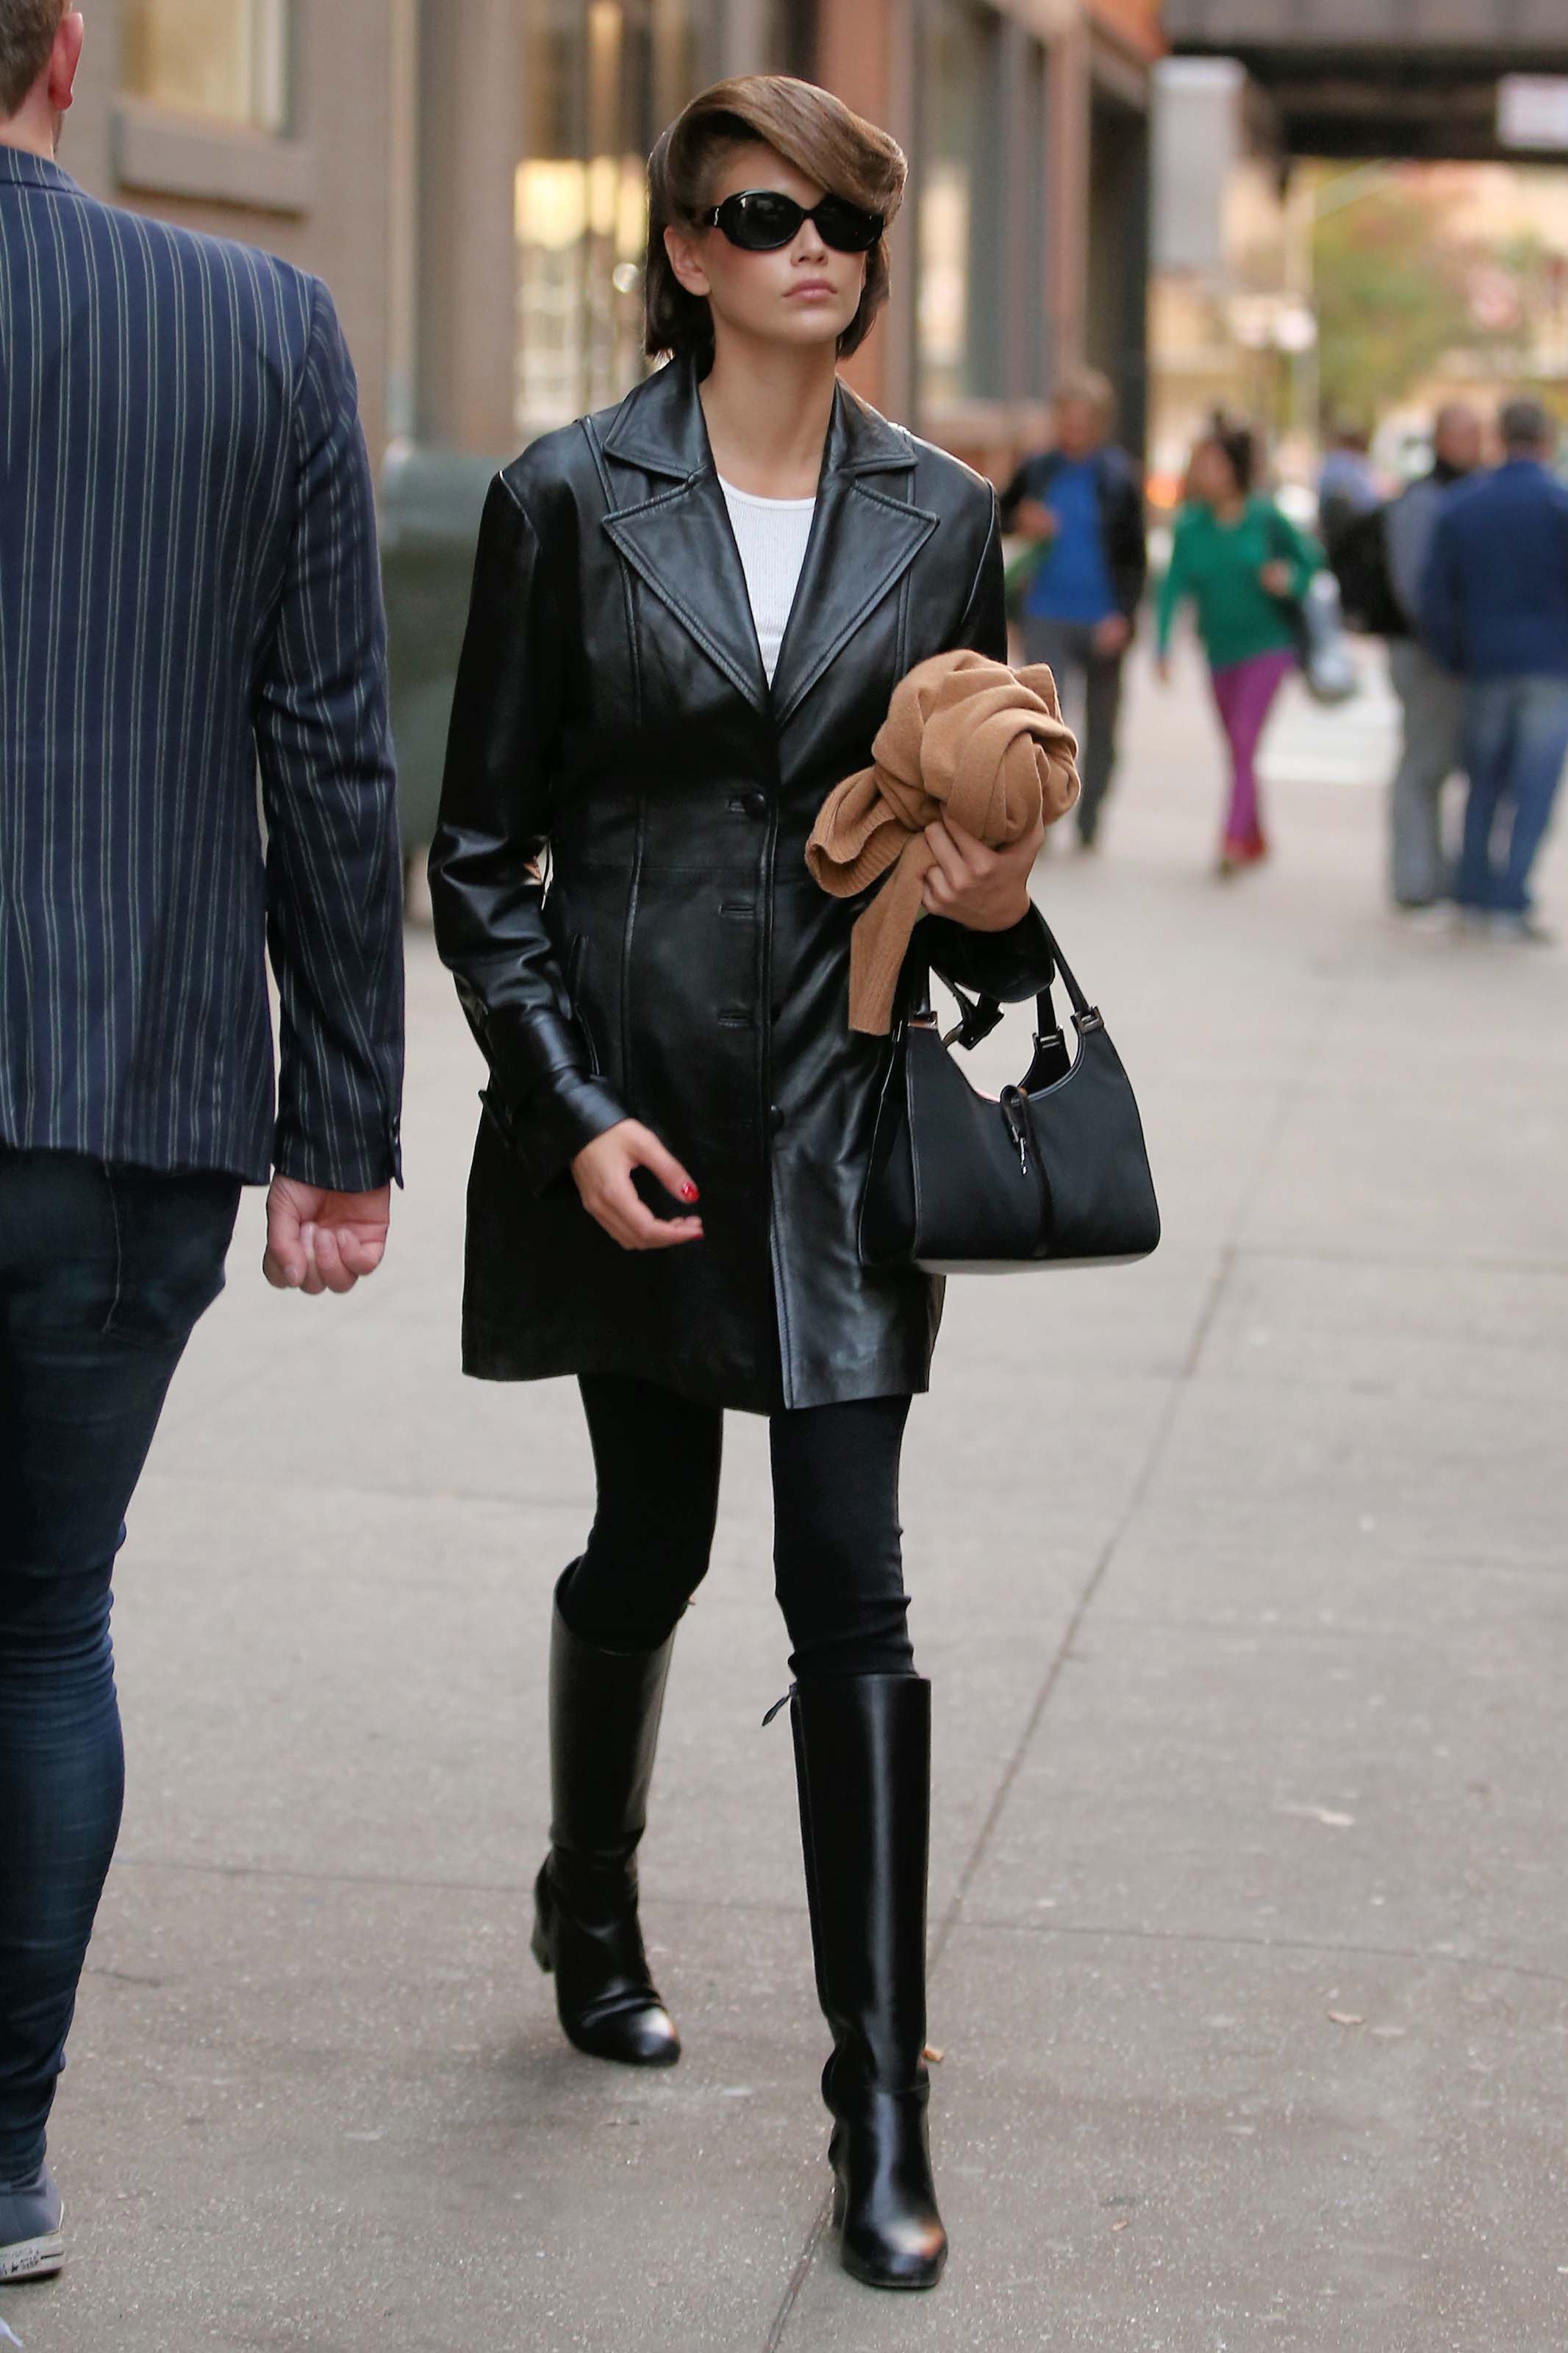 Kaia Gerber out in NYC